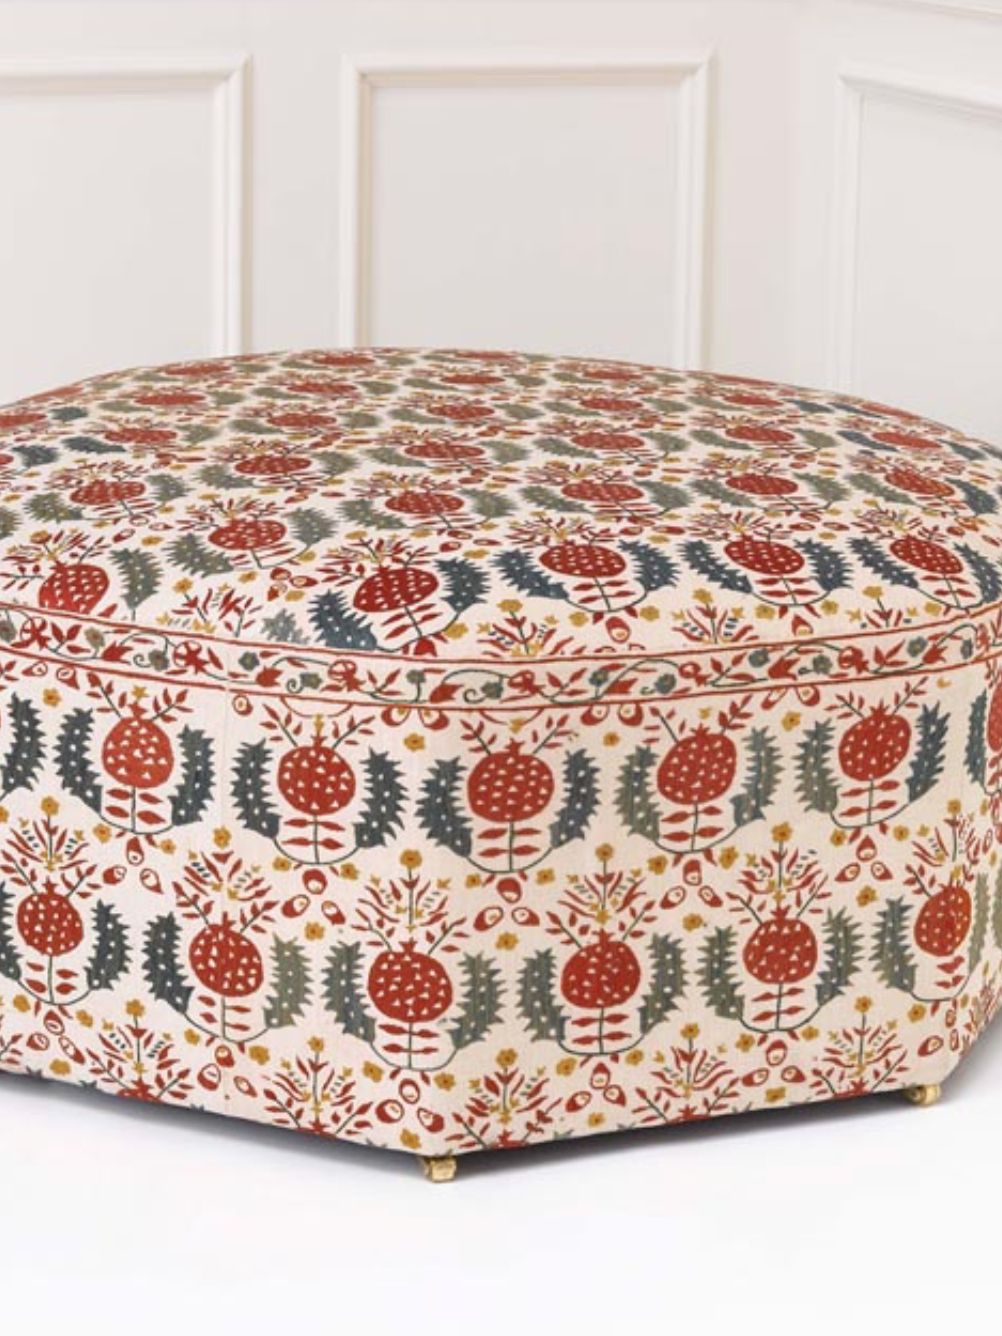 21 Best Ottomans And Footstools | House & Garden Intended For Multicolor Ottomans (View 12 of 15)